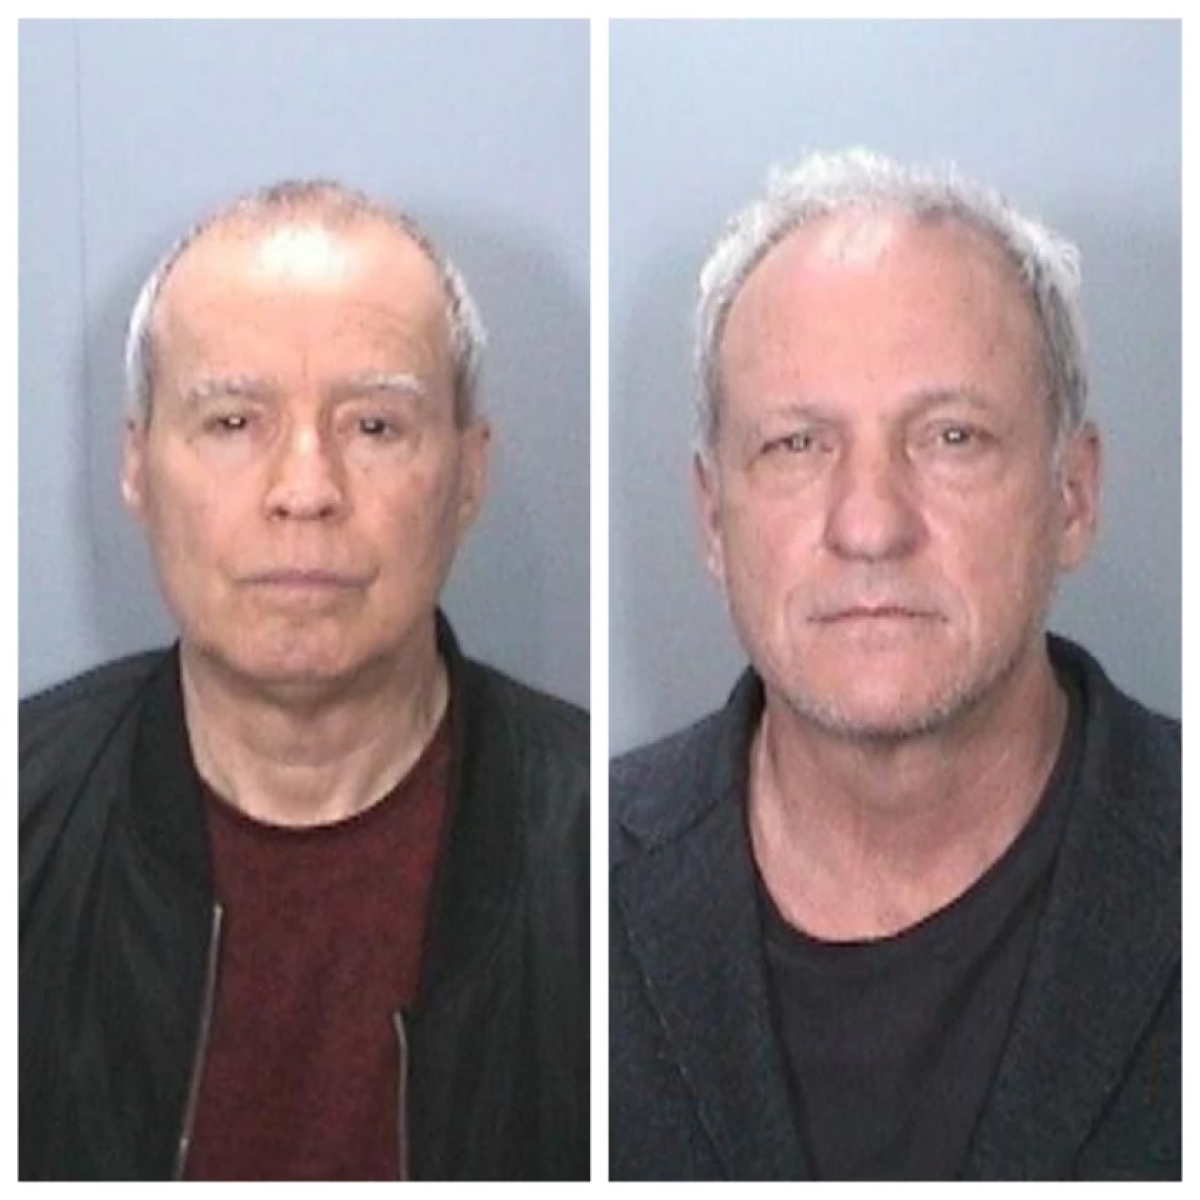 Pictured, from left, is Charles Albert Major, 72, of Irvine and Robert Andrew Lotter, 63, of Newport Beach.